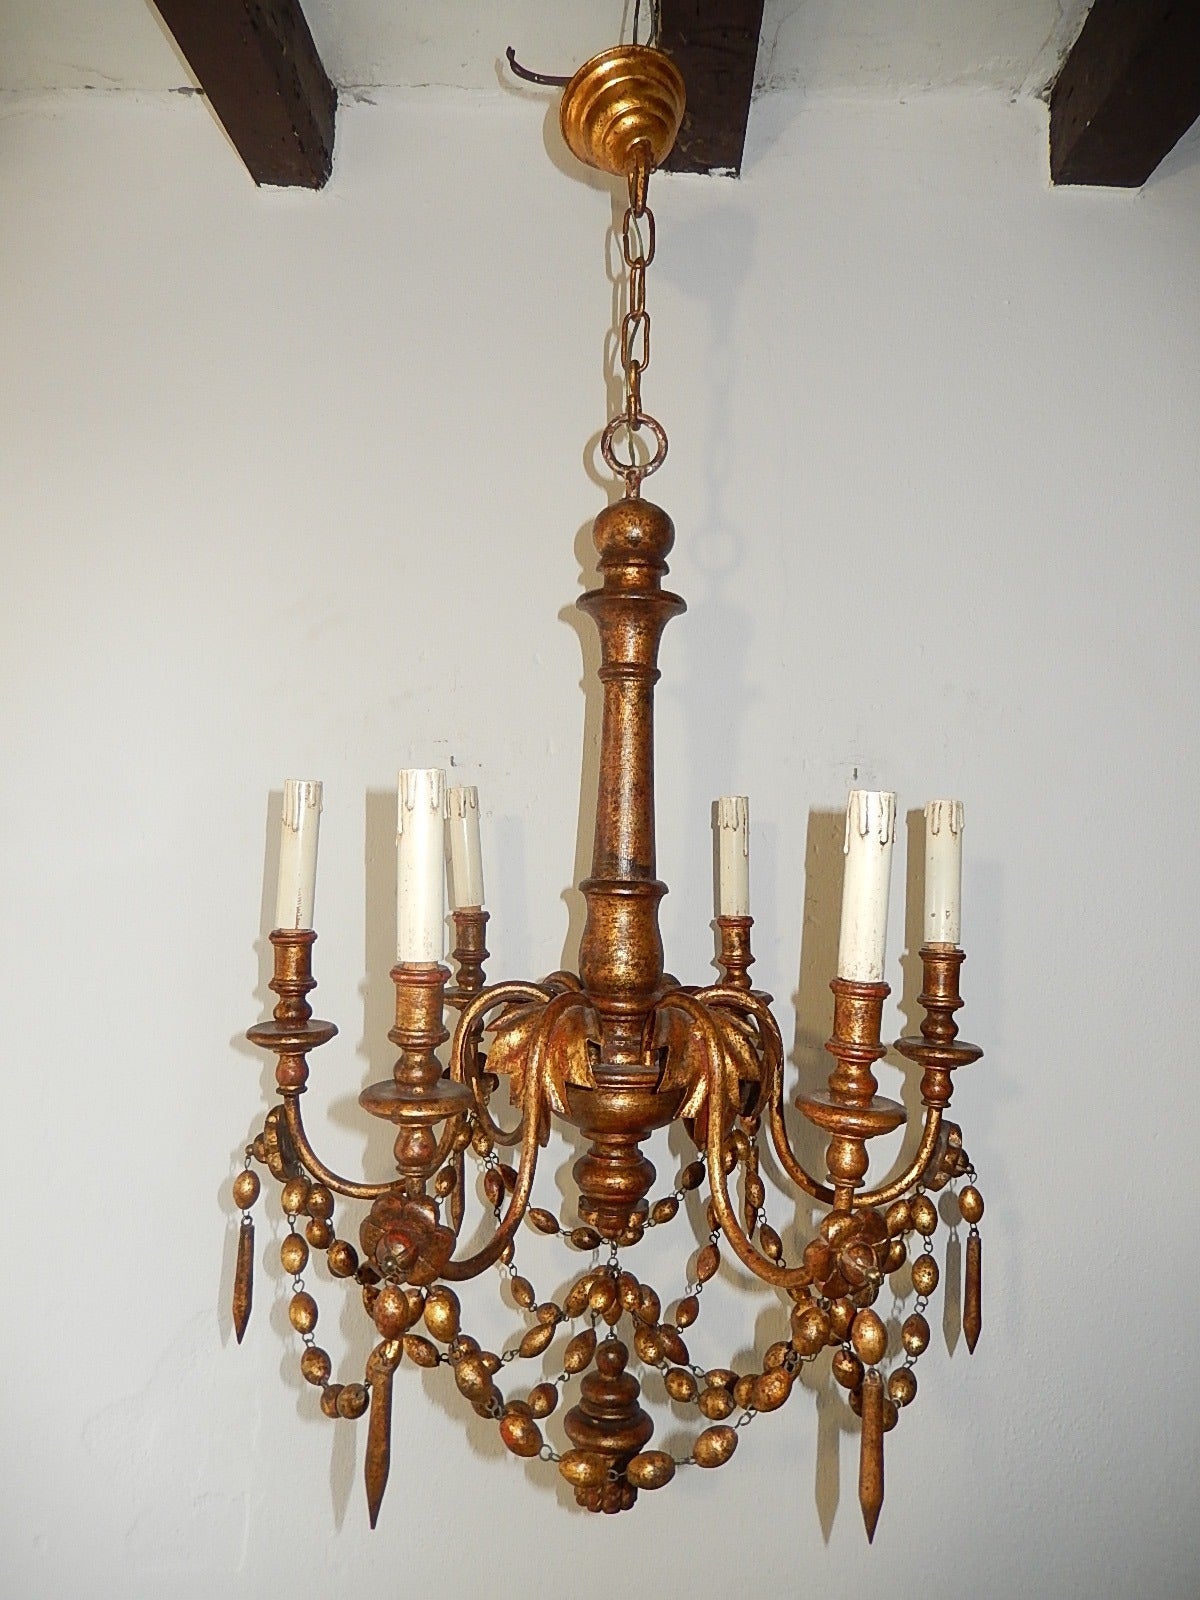 Housing six lights, gold gilt metal leaves with hand carved flowers, prisms and beads on gilt wood.  Also gilt wood tassel as finial.  Adding another 9 inches of original chain and canopy.  Re-wired and ready to hang.  Free priority shipping from